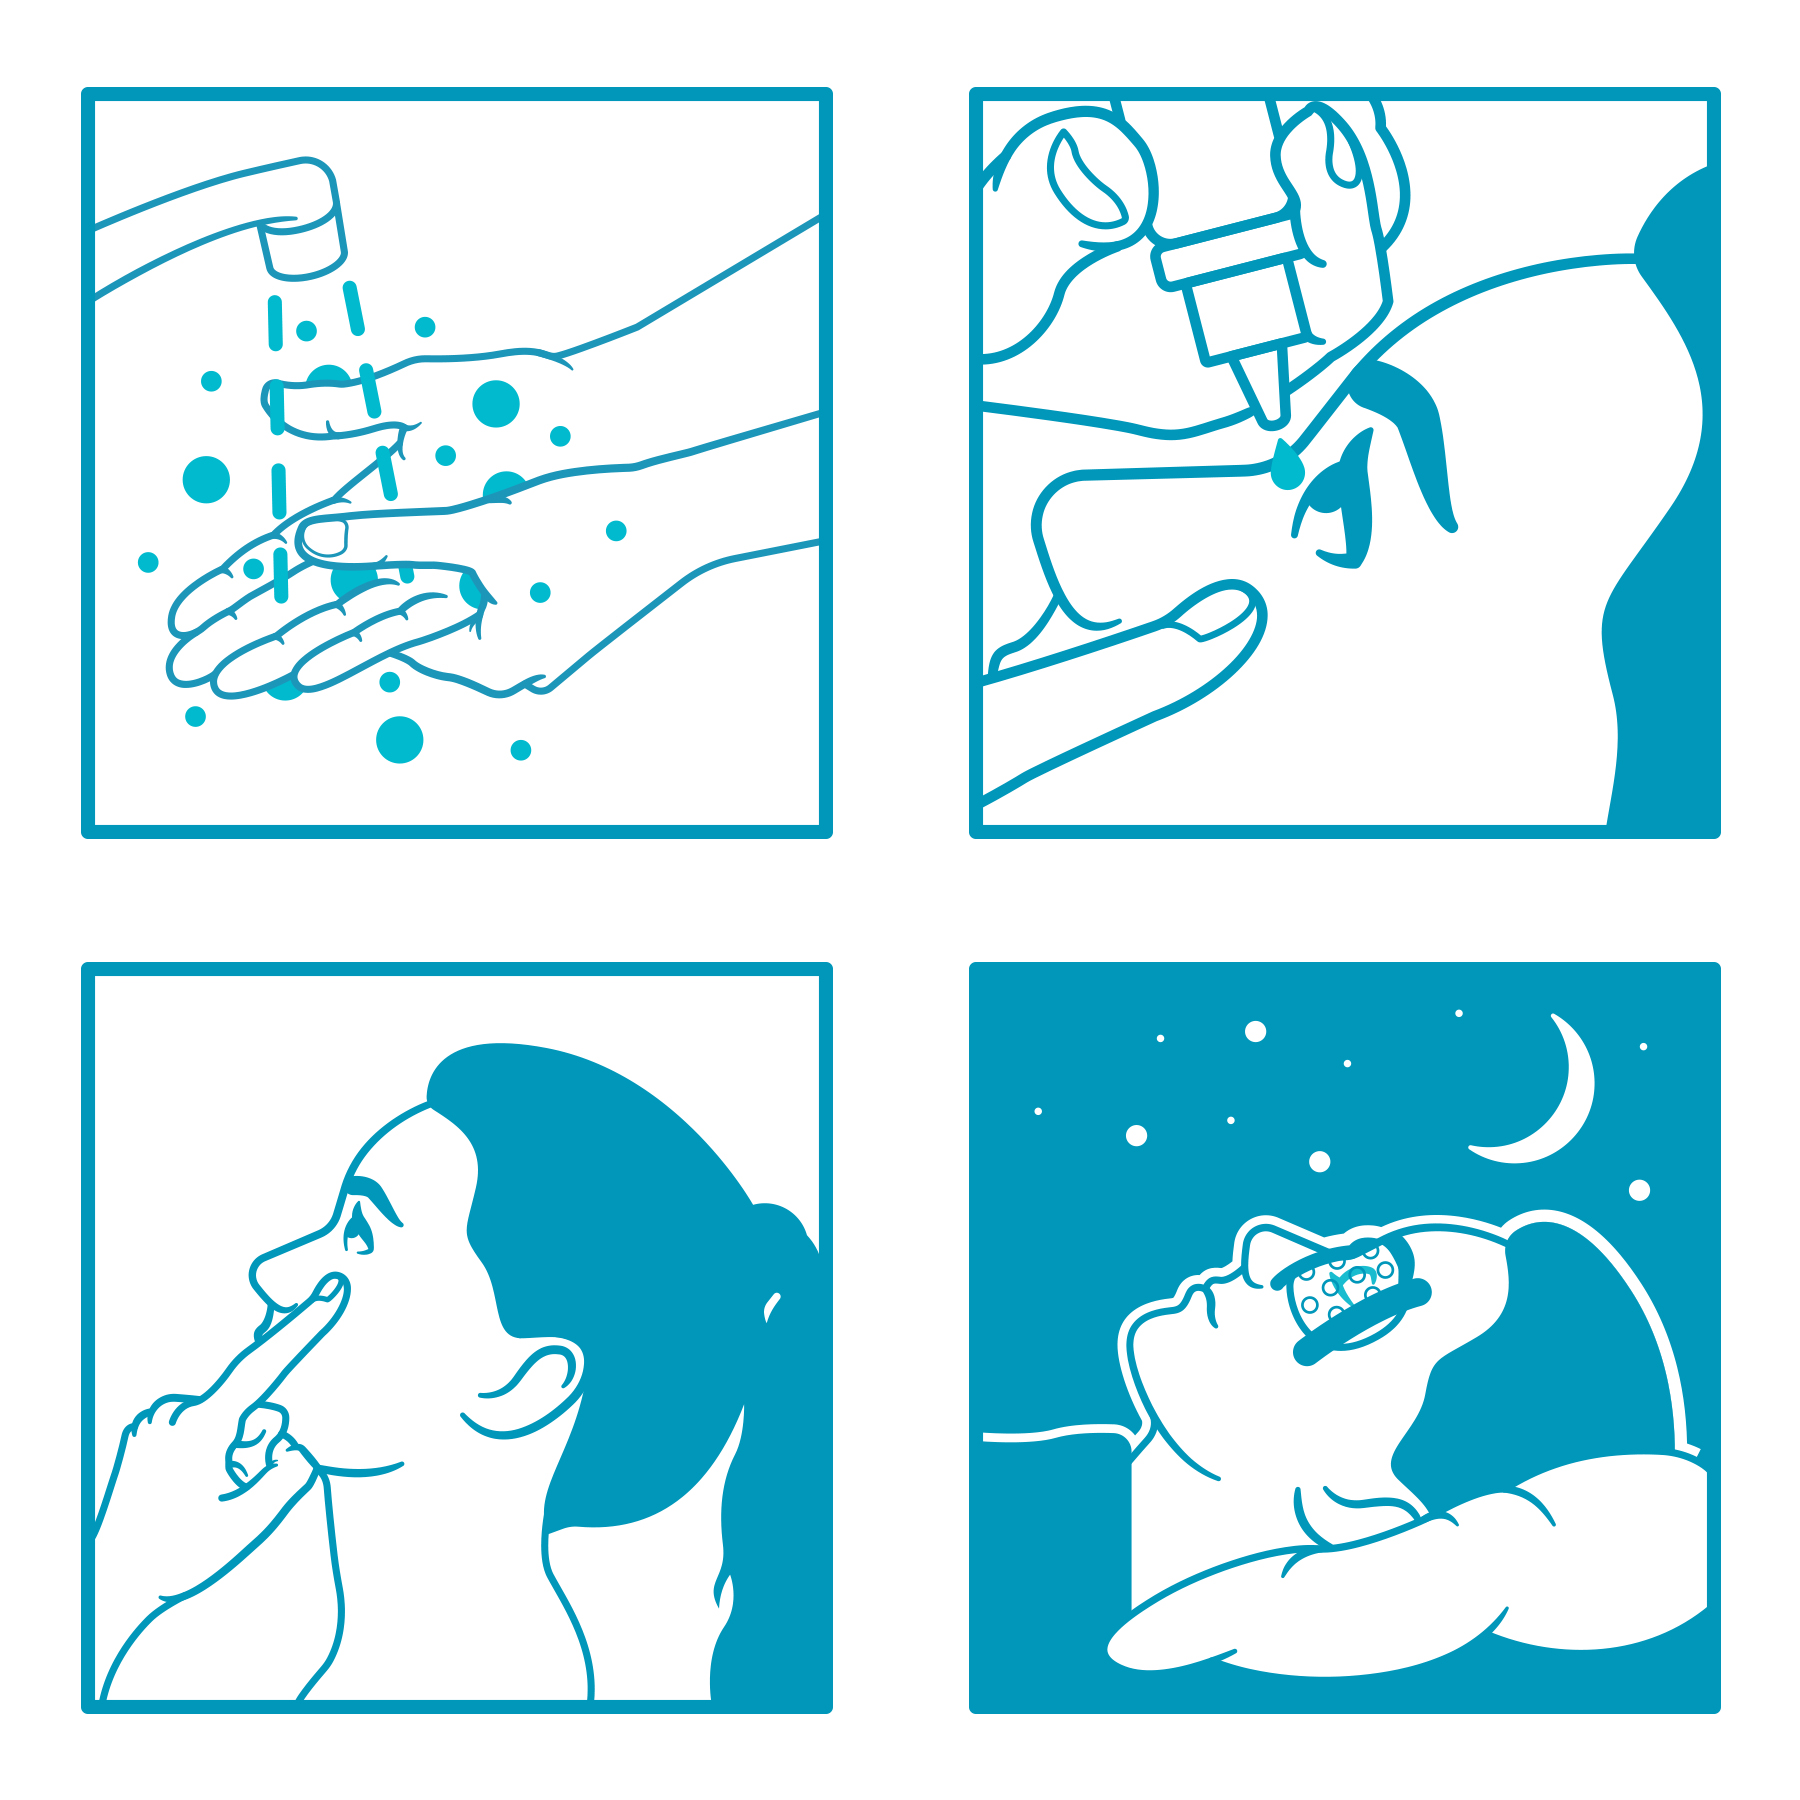 Eye drop instruction and infographic informative illustration to show how to wash your hands, pull down your lower eyelid, one drop into your pocket, close your eyes and how to sleep with your eye shield